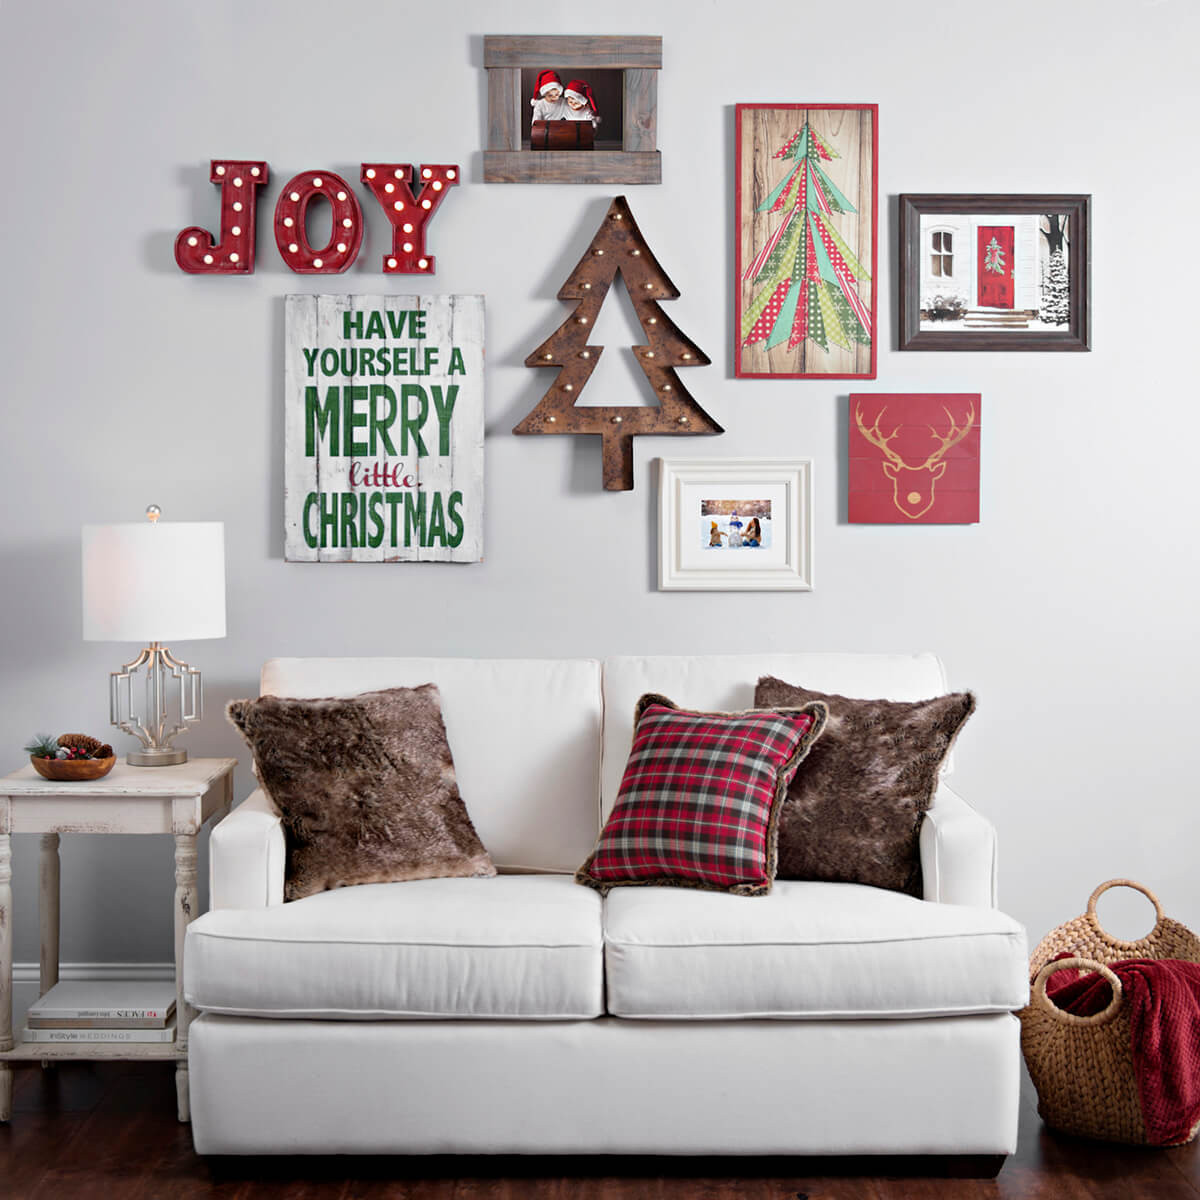 Christmas Wall Decor
 35 Best Christmas Wall Decor Ideas and Designs for 2019